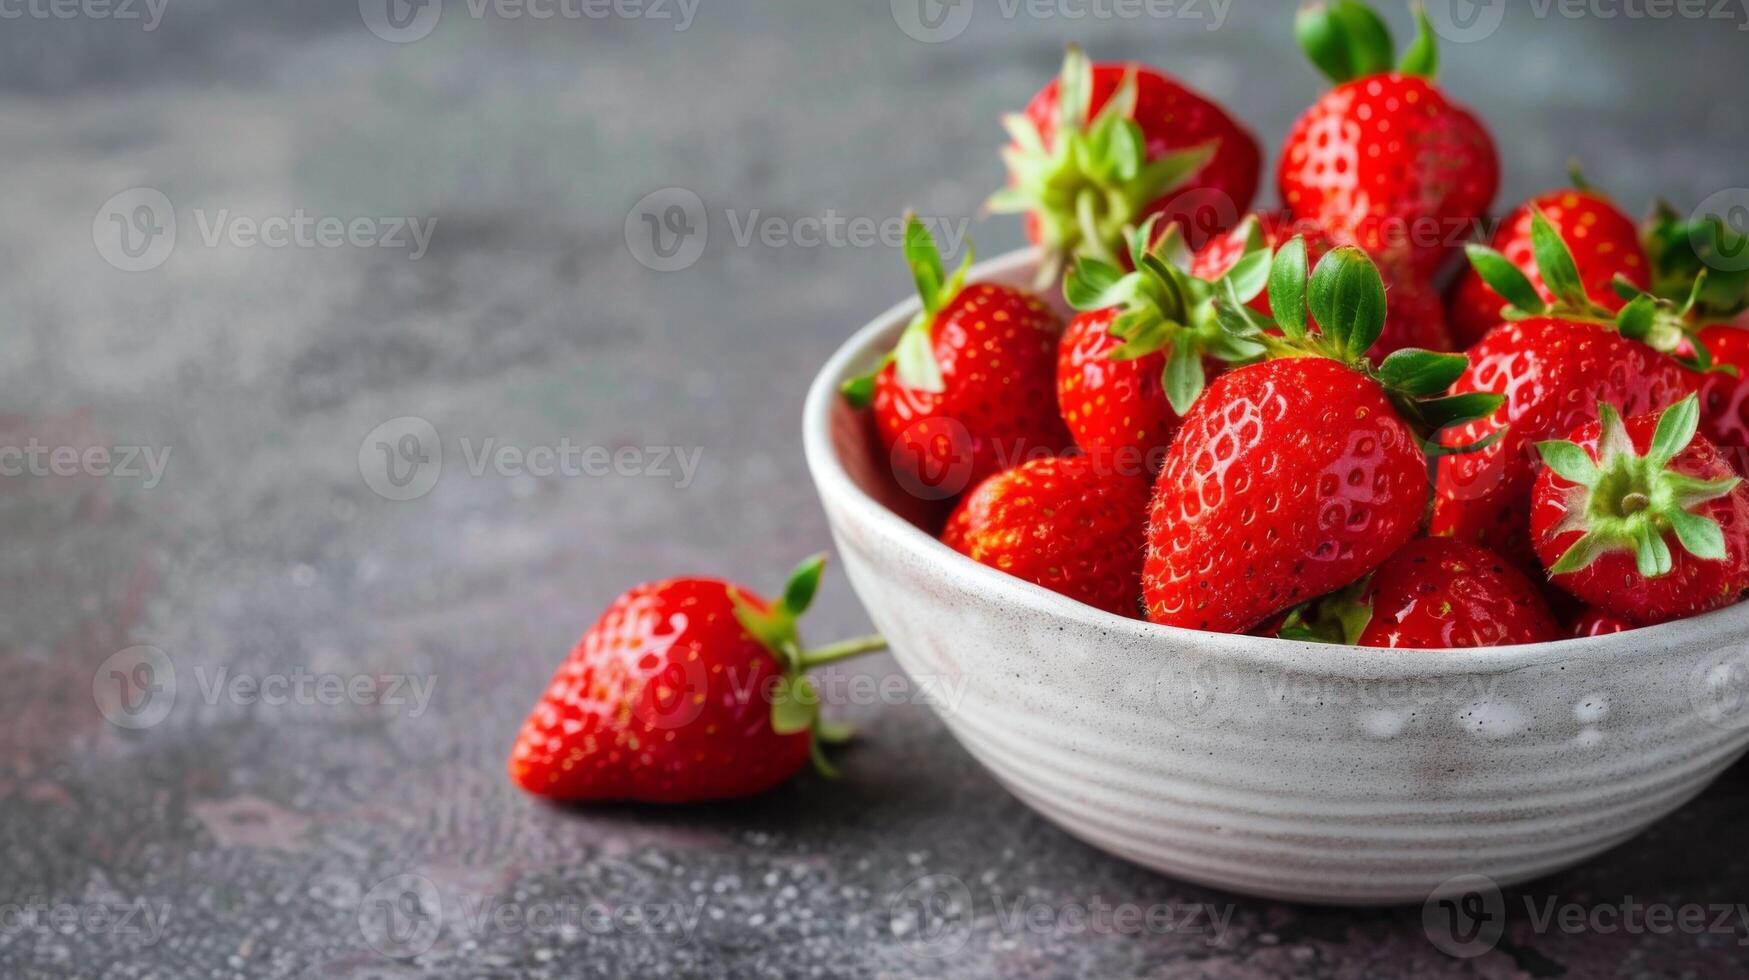 Fresh strawberries in a ceramic bowl with ripe red berries and a sweet juicy texture photo